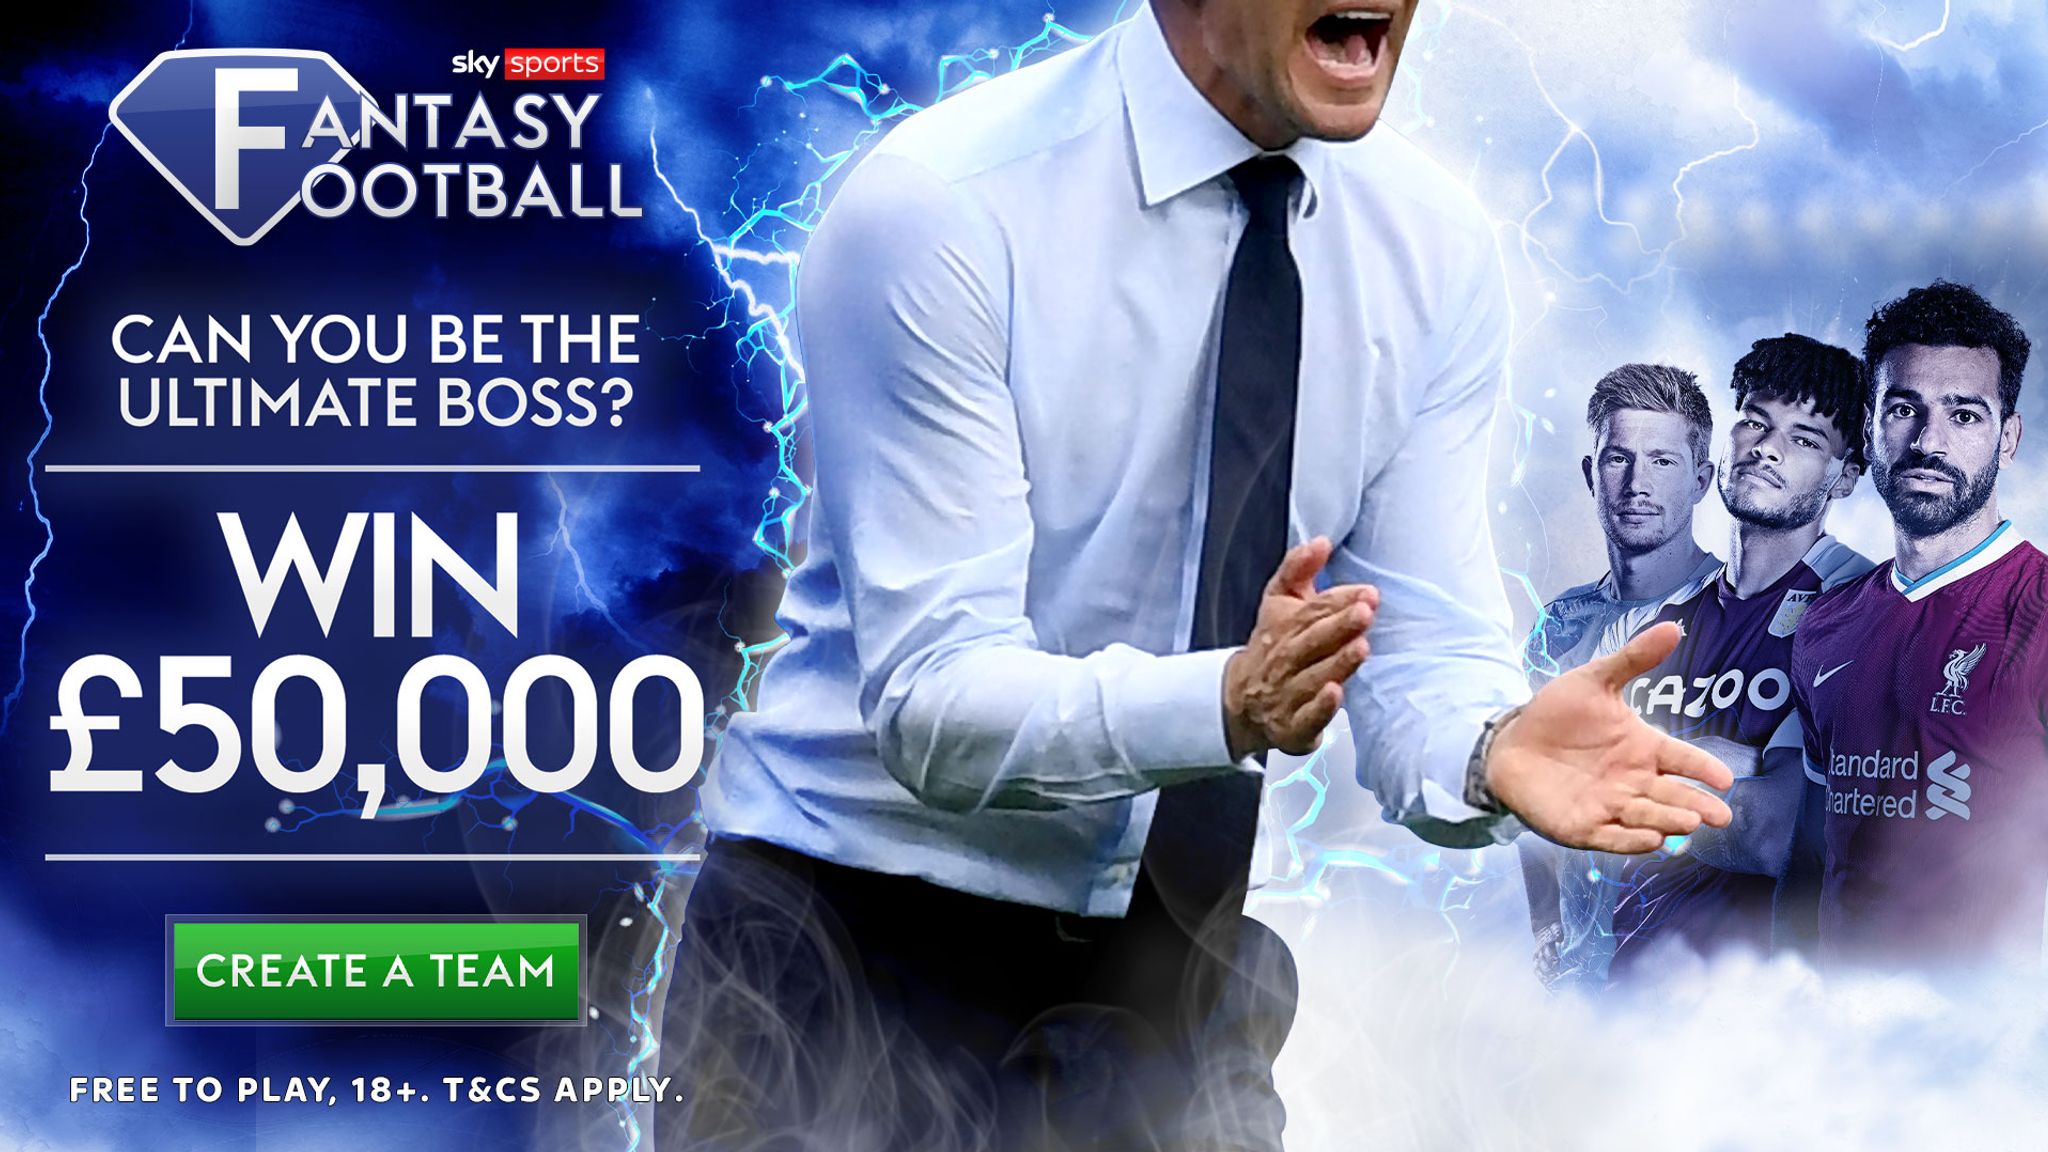 Sky Sports Fantasy Football is LIVE! Create your team for free and win £50,000 Football News Sky Sports